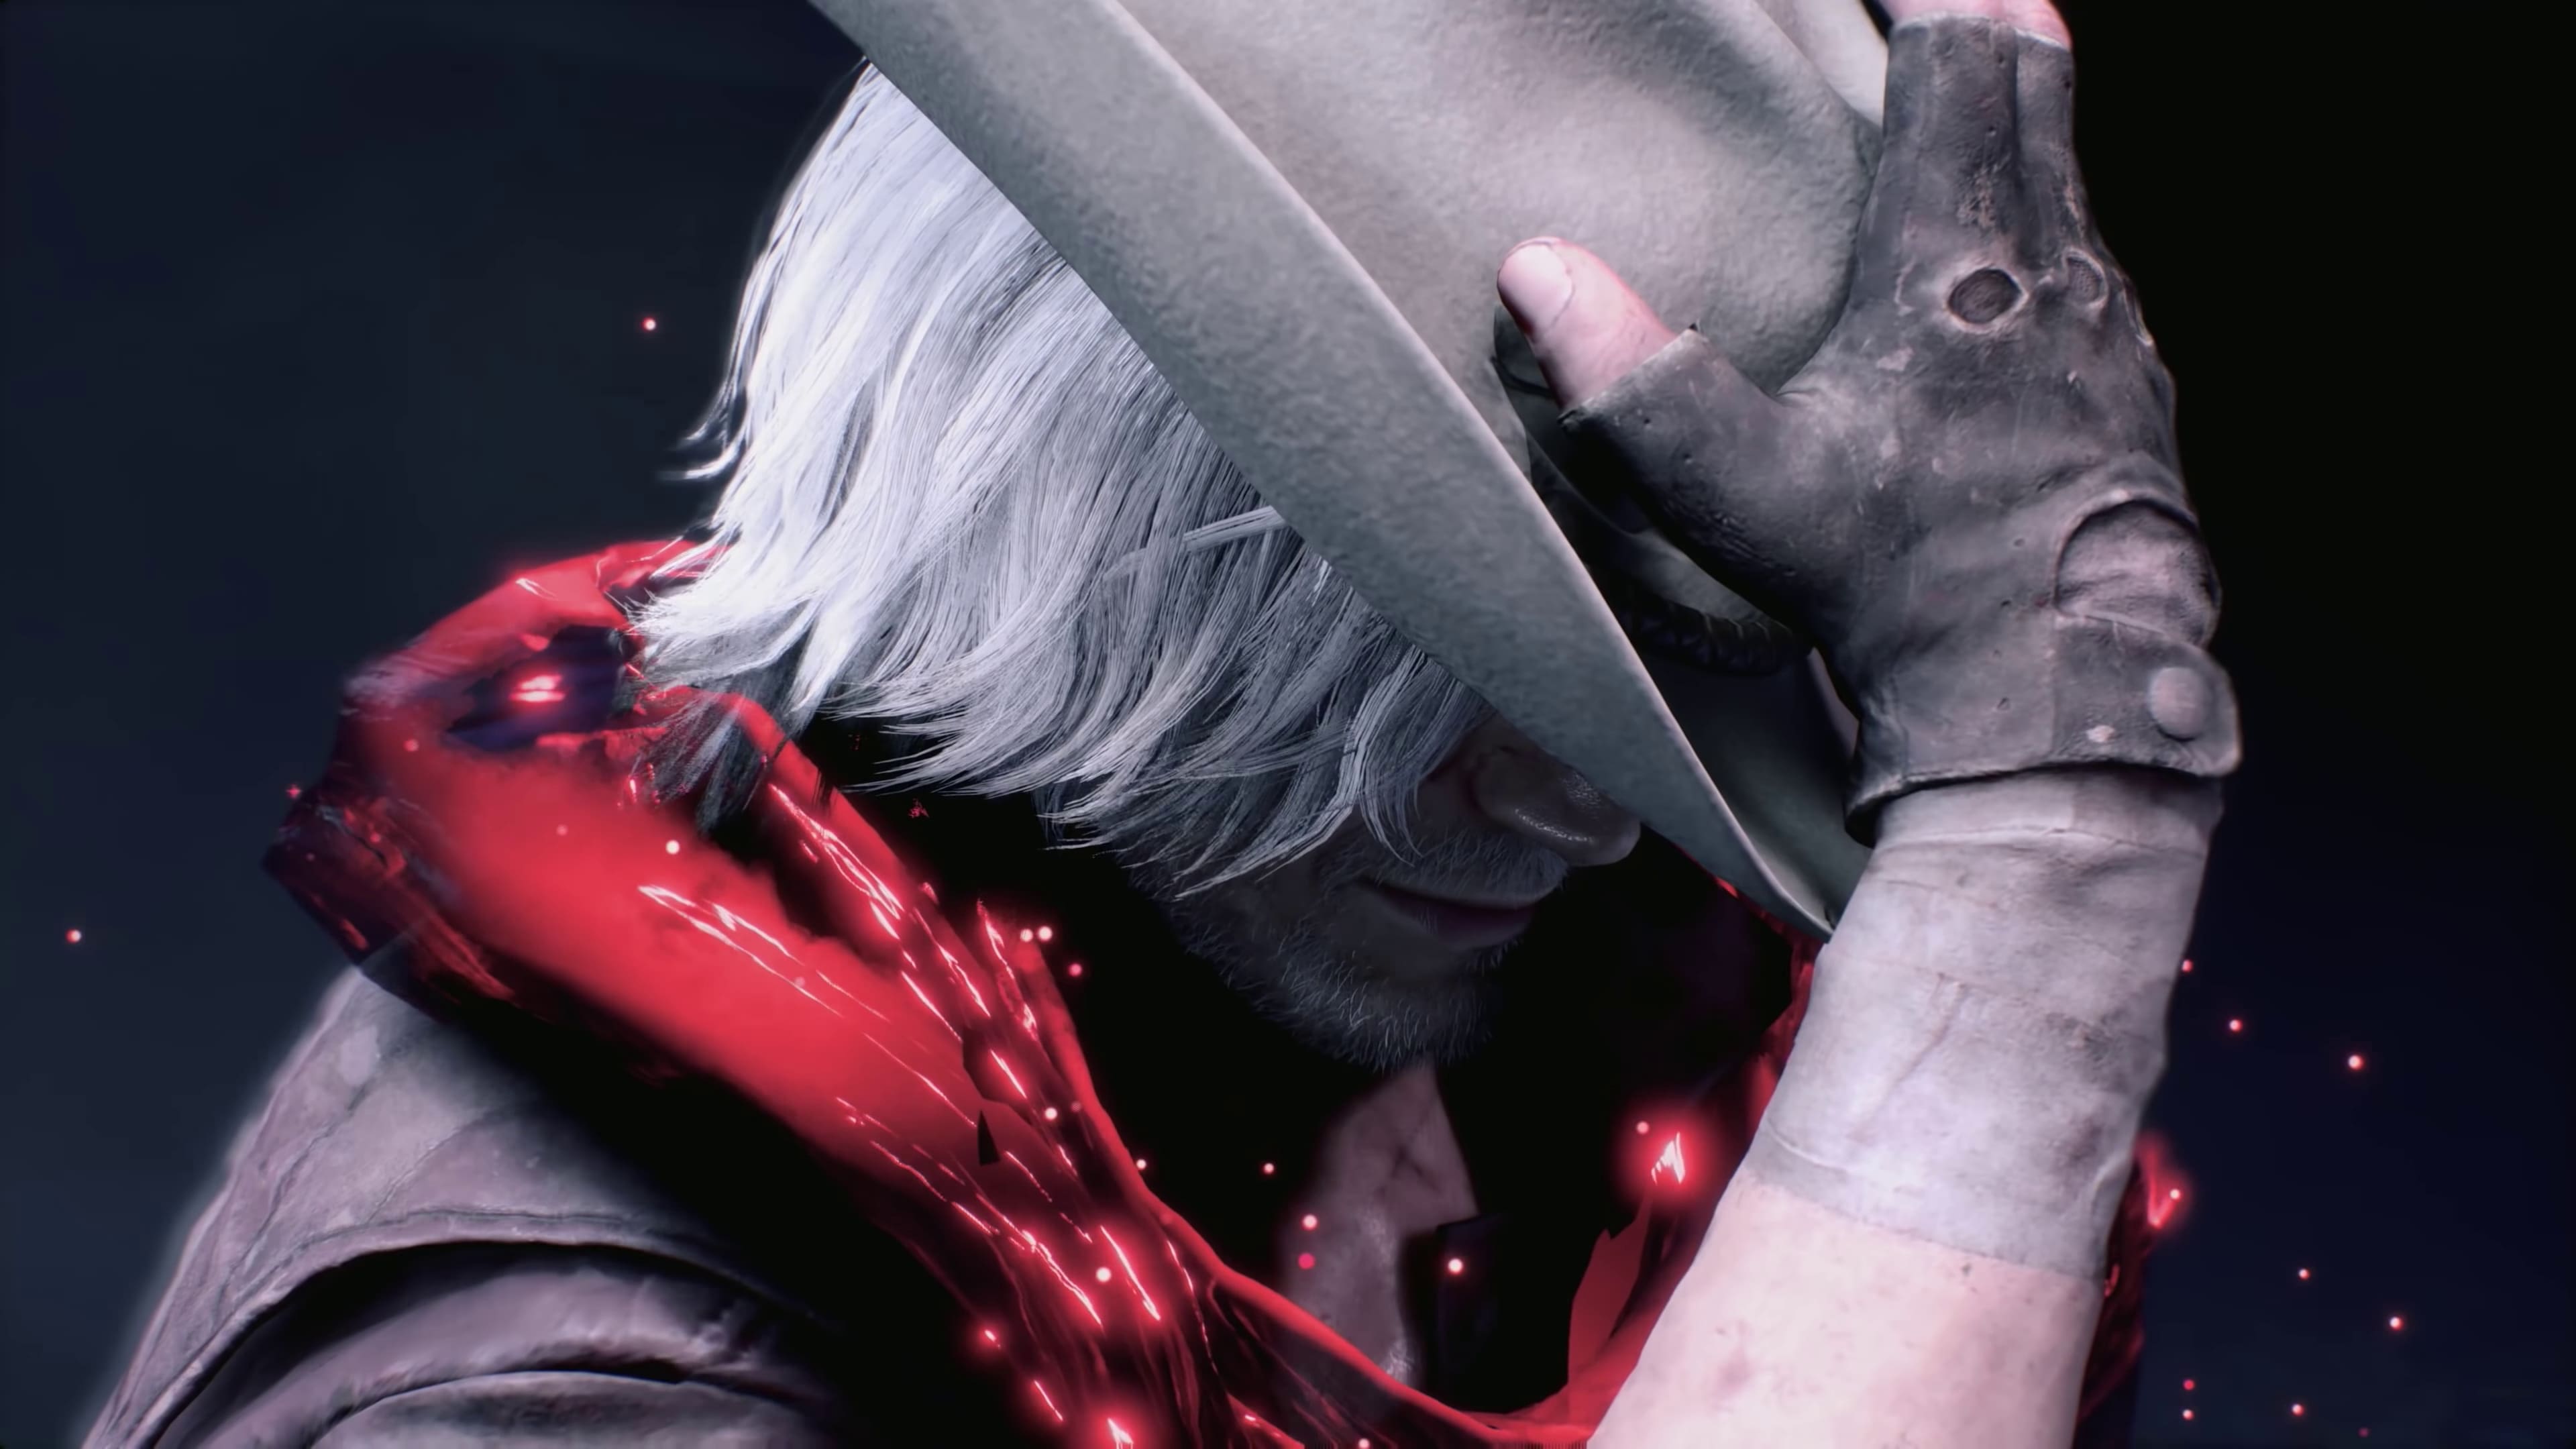 Wallpaper Of Devil May Cry Dante, Video Game, Knife Dmc 5 Dr Faust